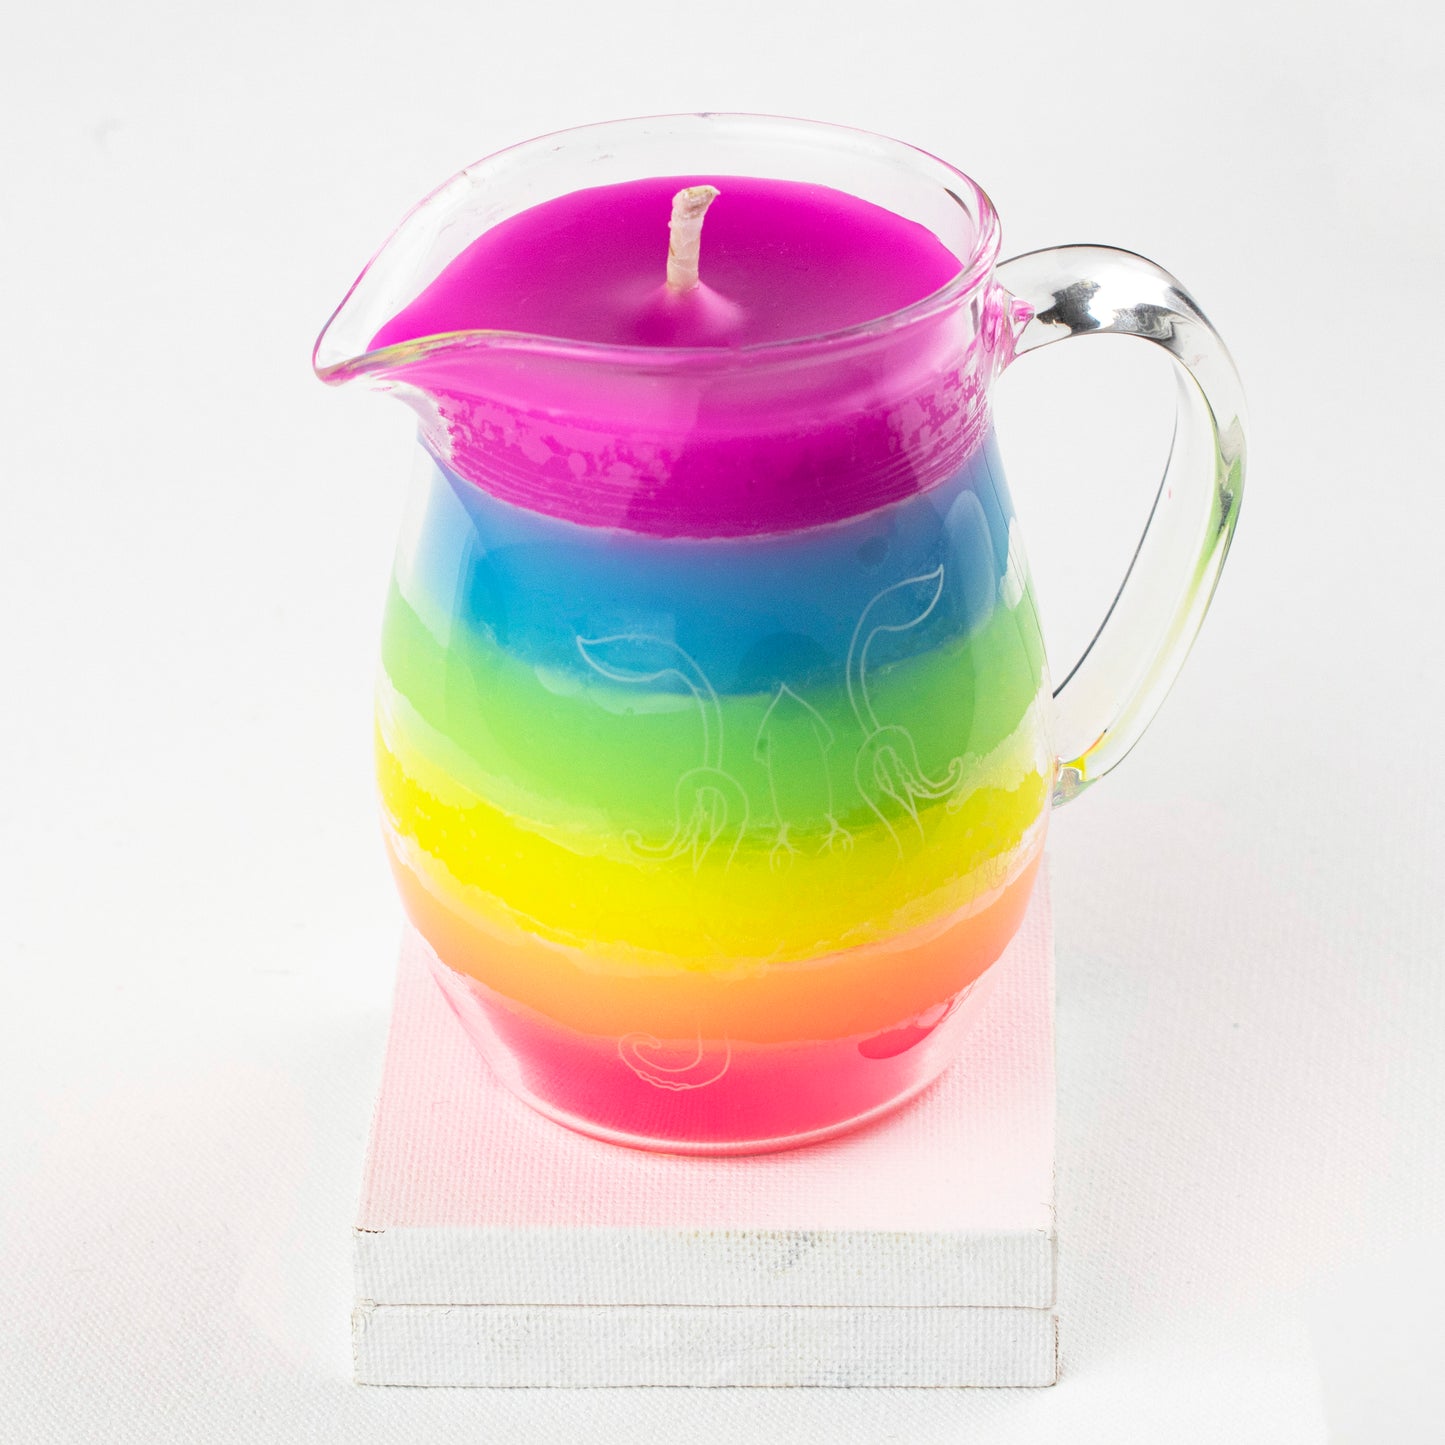 Classic Wax Play Pitcher Candle - Low Temp - Unscented - Paraffin